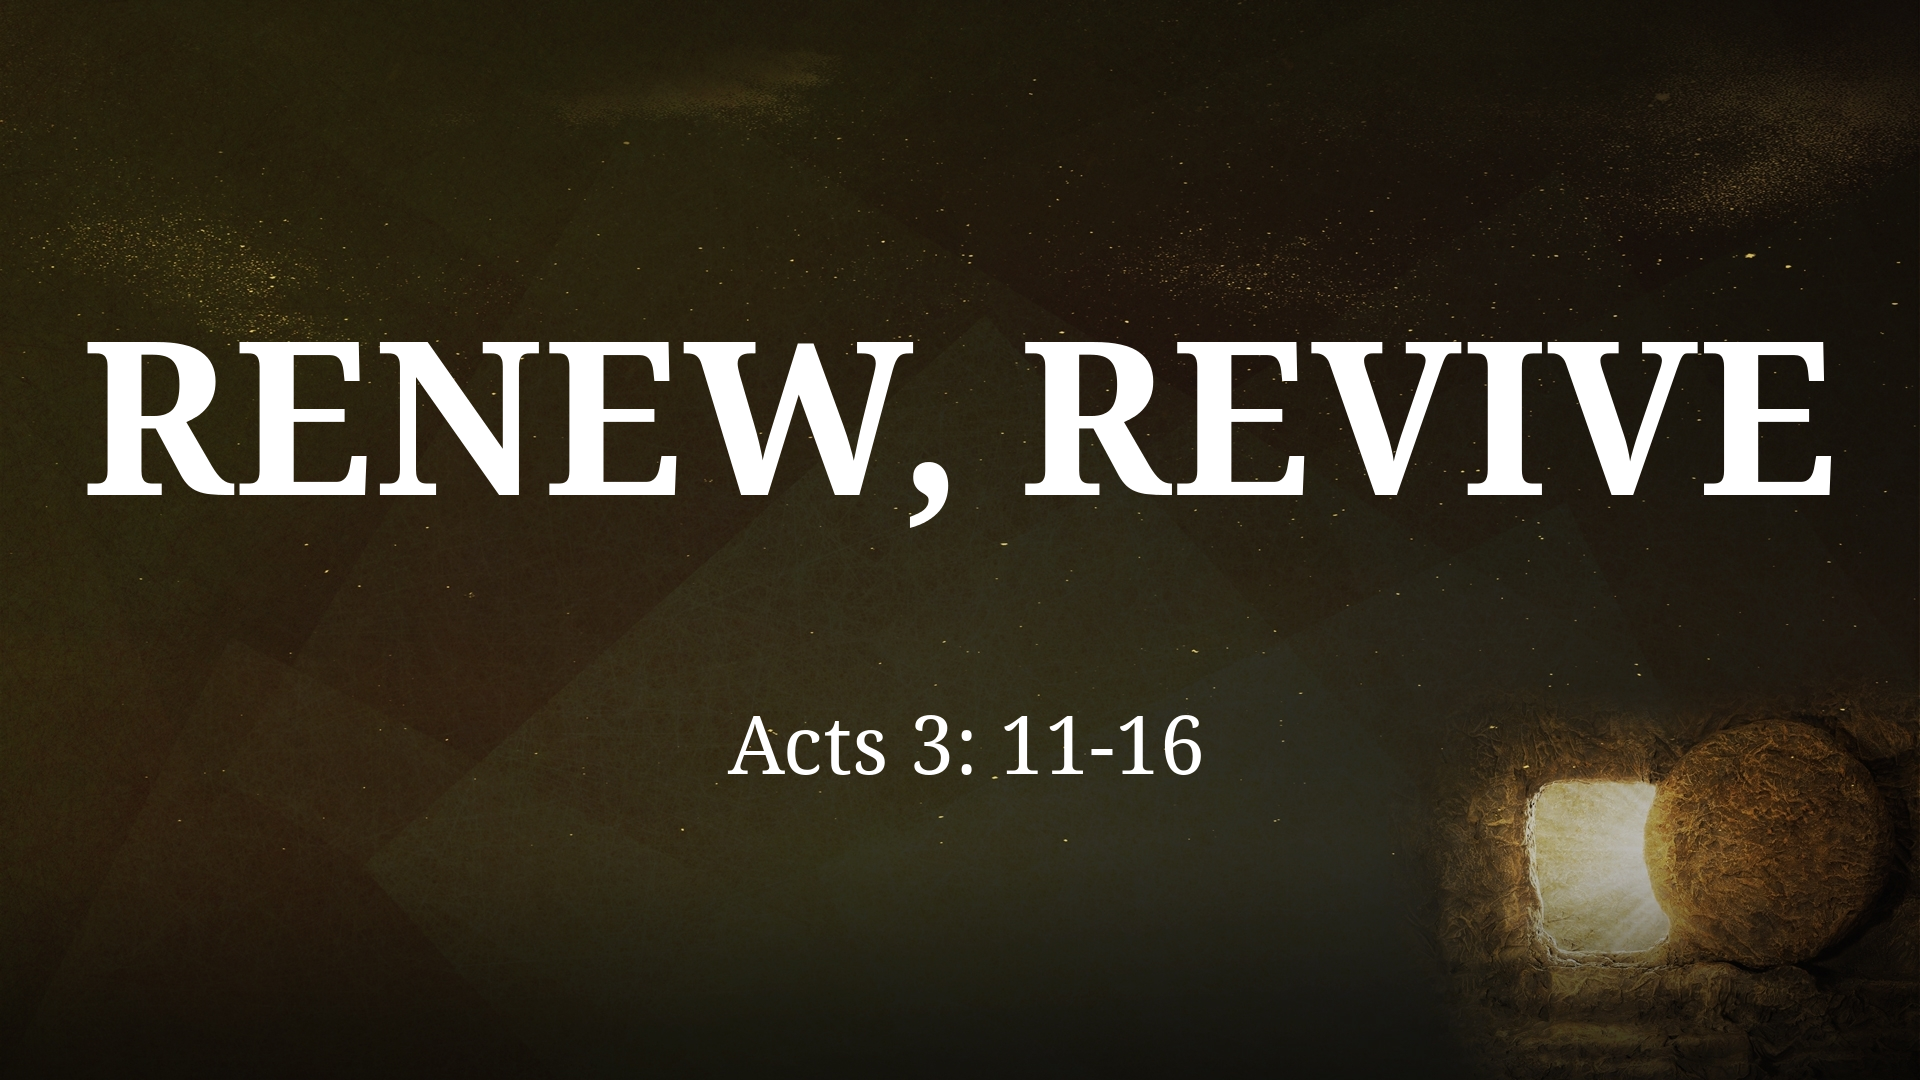 Apr 11, 2021 - Renew, Revive (Video) Acts 3: 11-16